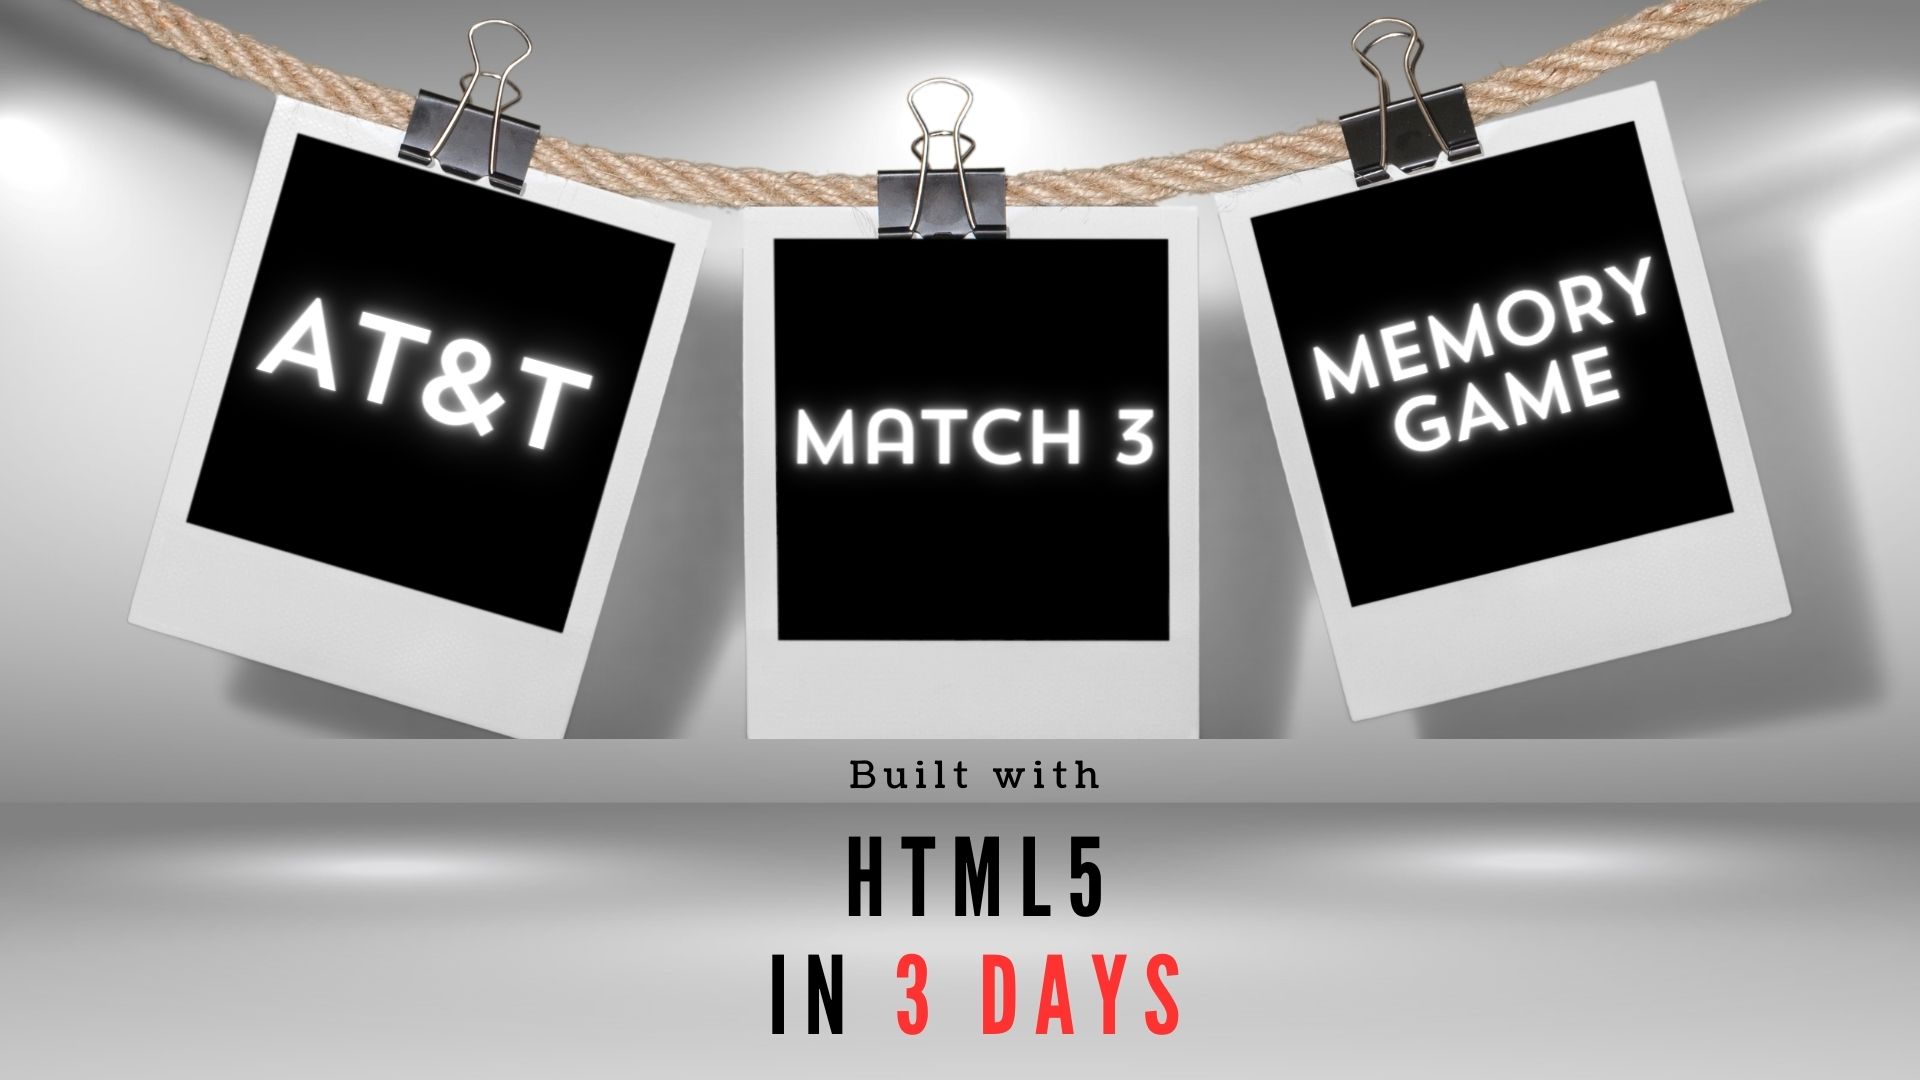 AT&T Match 3 Memory Game built with HTML5 in 3 days